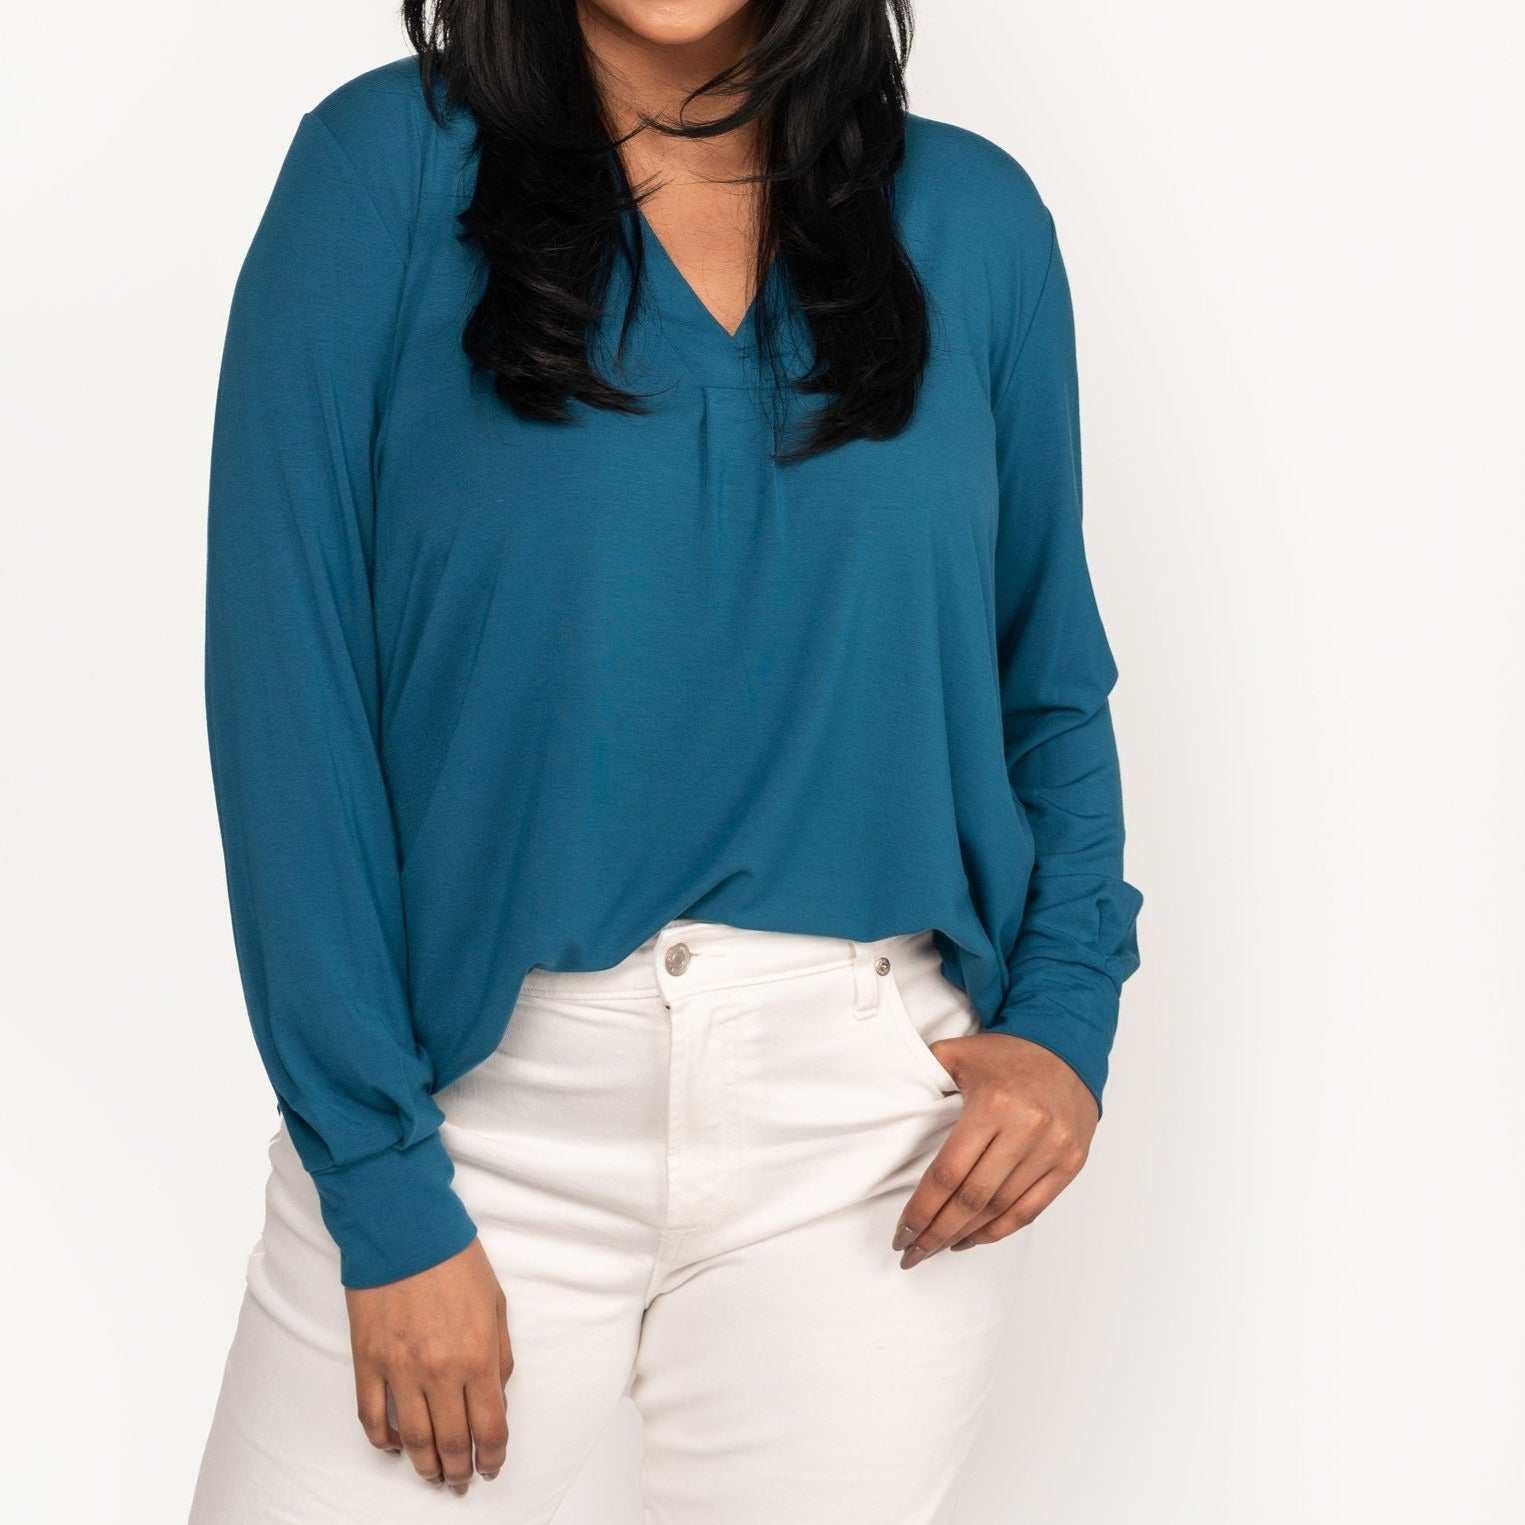 Woman wearing a loose flowing blue v-neckline shirt with white jeans